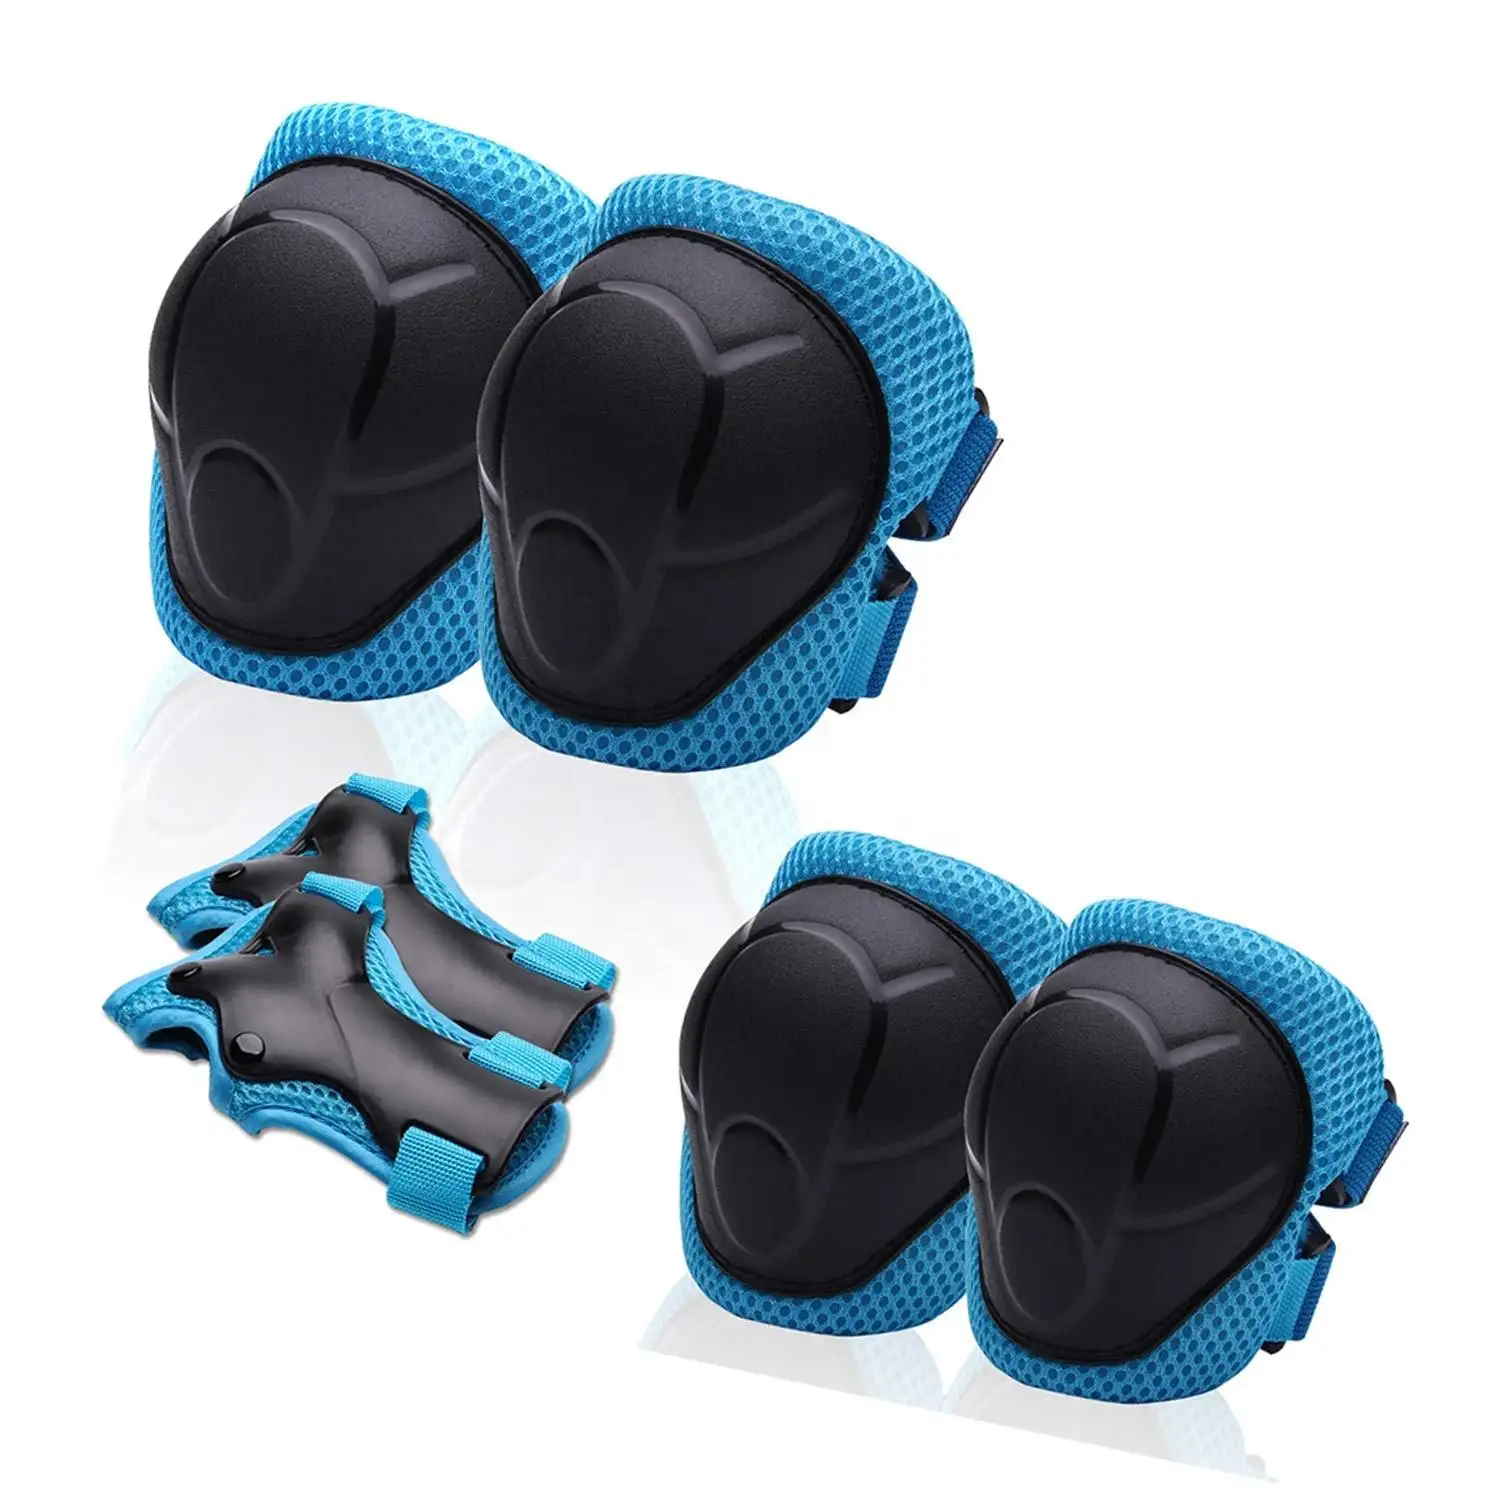 Hot Sales Sports Knee Pads para Baby Kids Protective Gear Ajustável Skating Bike Scooter Rollerblading Elbow Wrist Guards